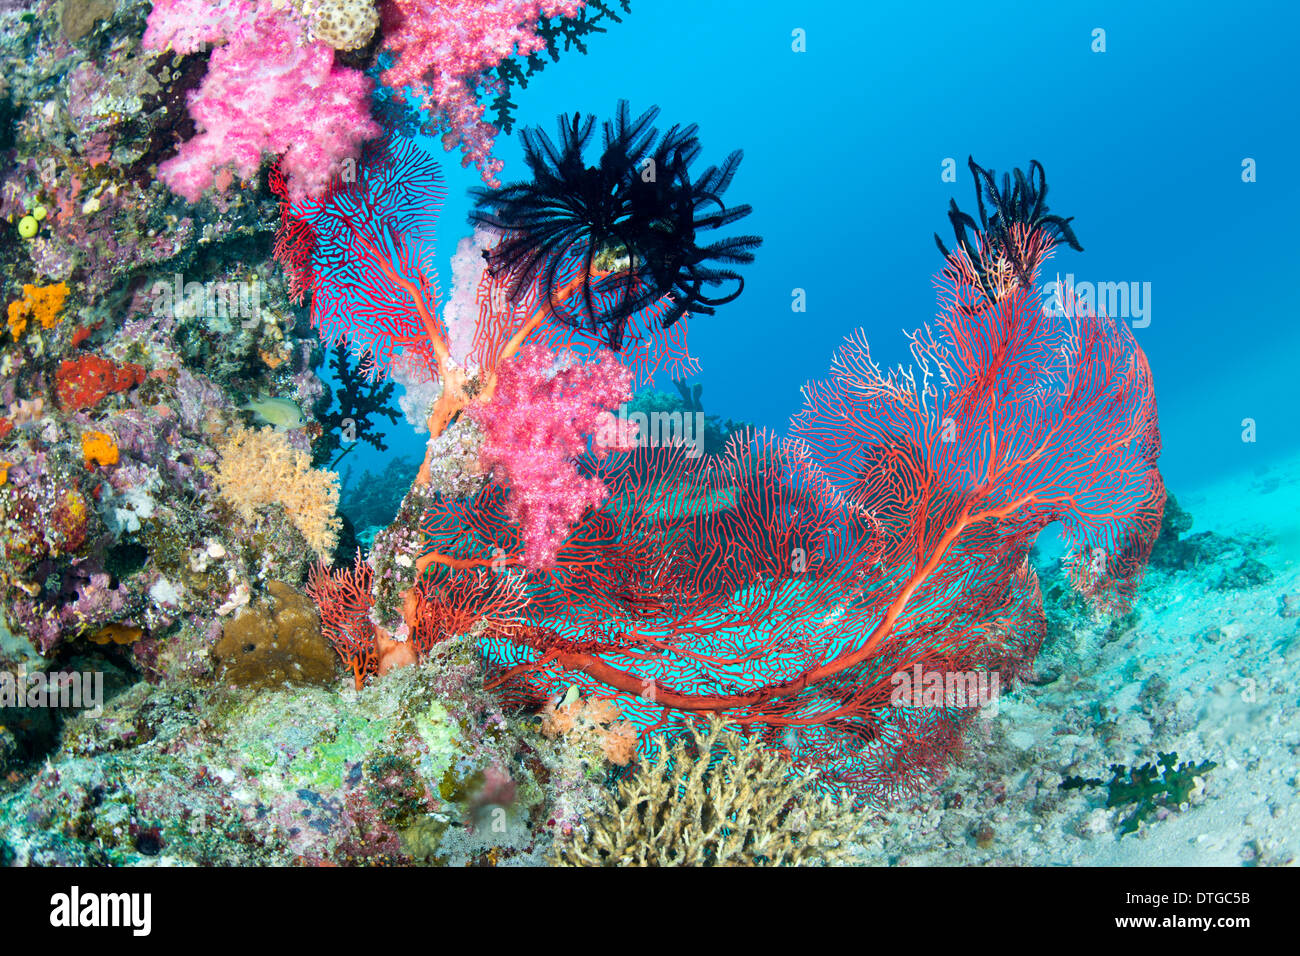 Beautiful, pink tropical underwater corals with a large red seafan on a reef surrounded by clean, blue water. Stock Photo